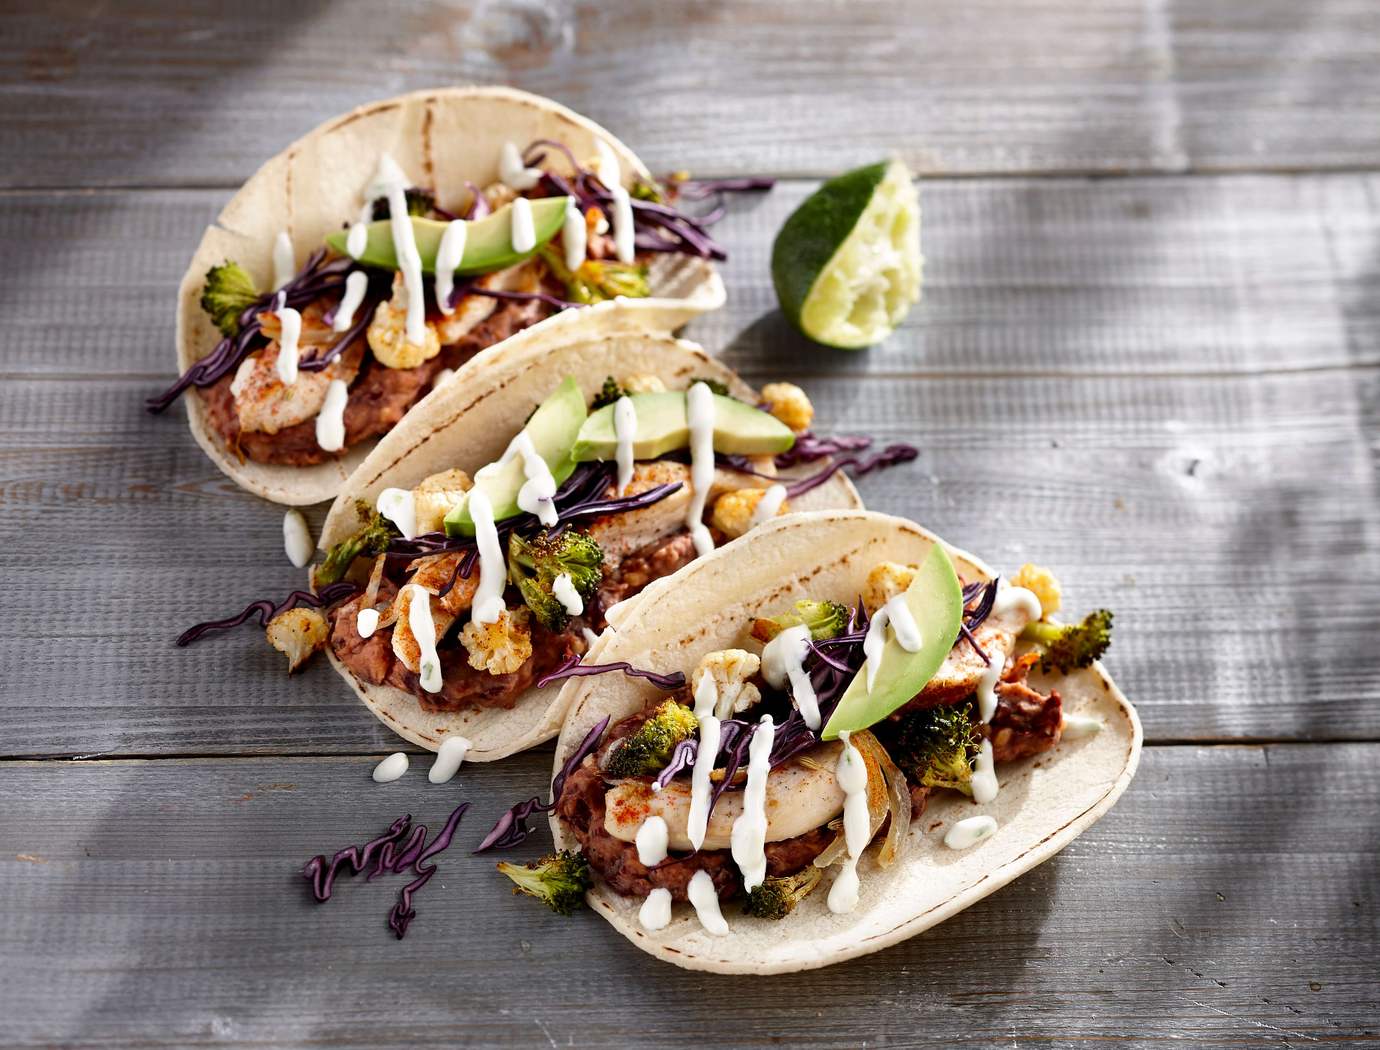 Chicken tacos with mashed red kidney beans